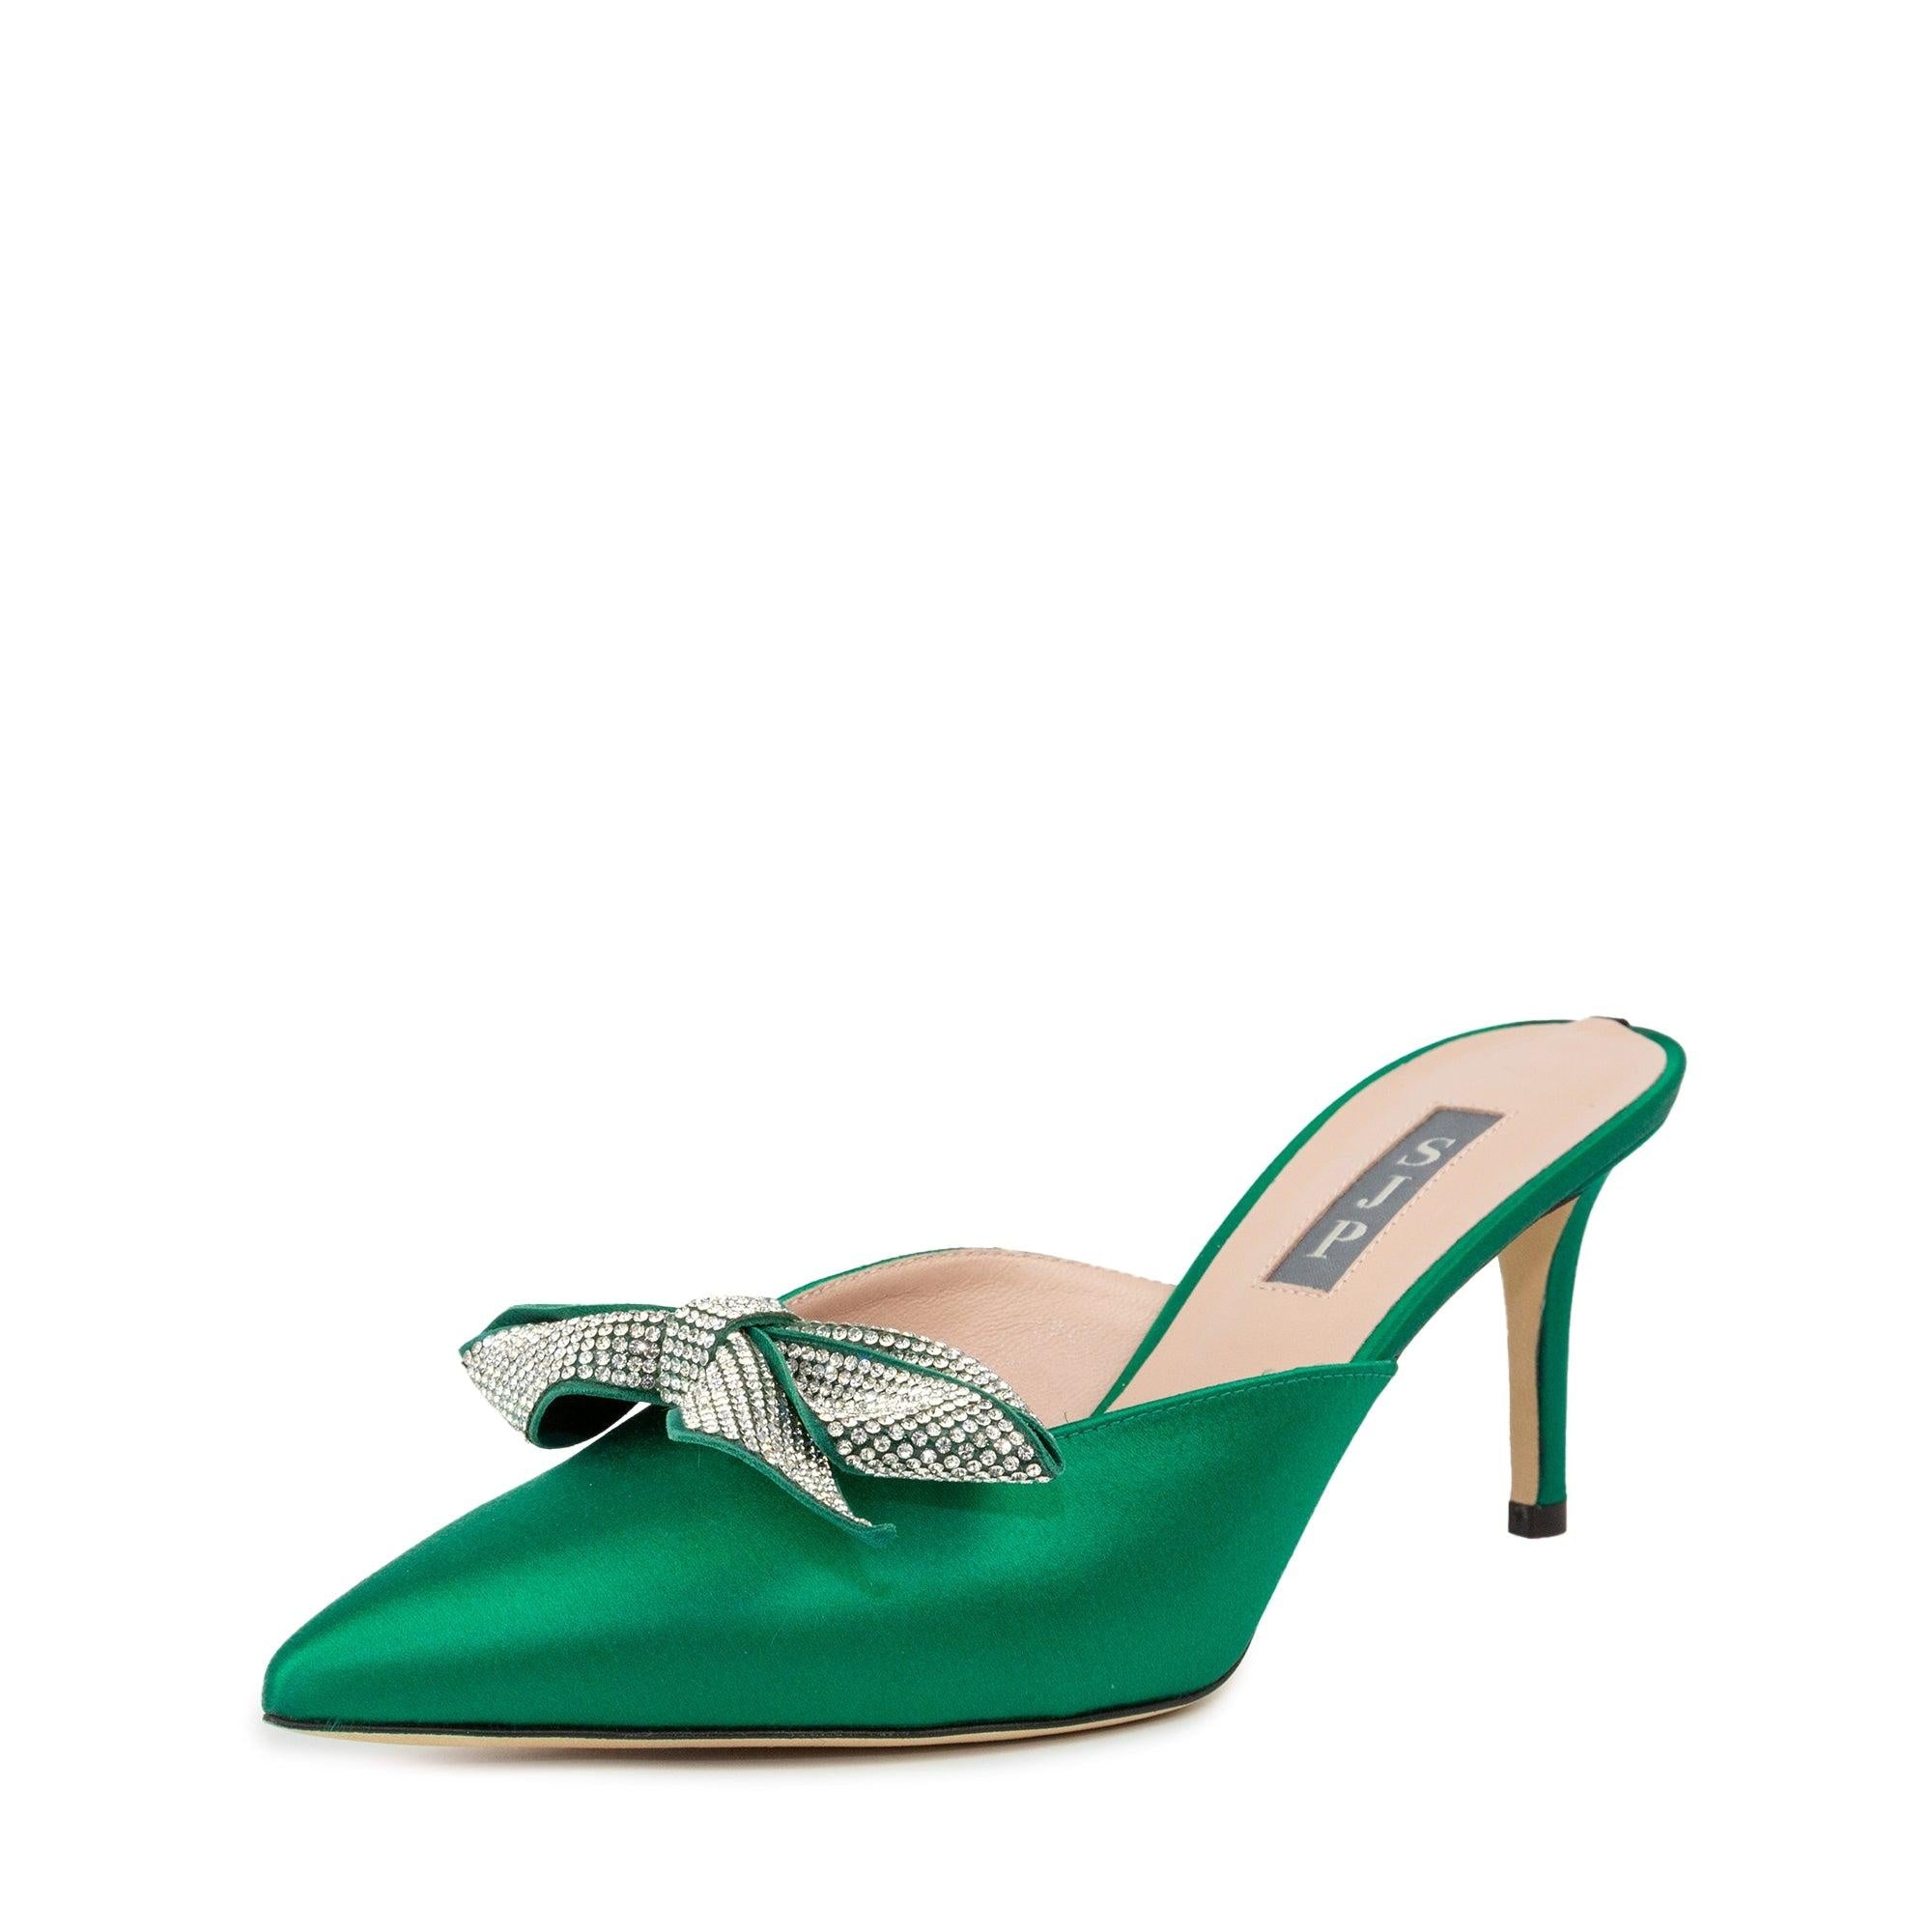 Buy SJP by Sarah Jessica Parker Paley Emerald Green Satin Mules 70mm Online